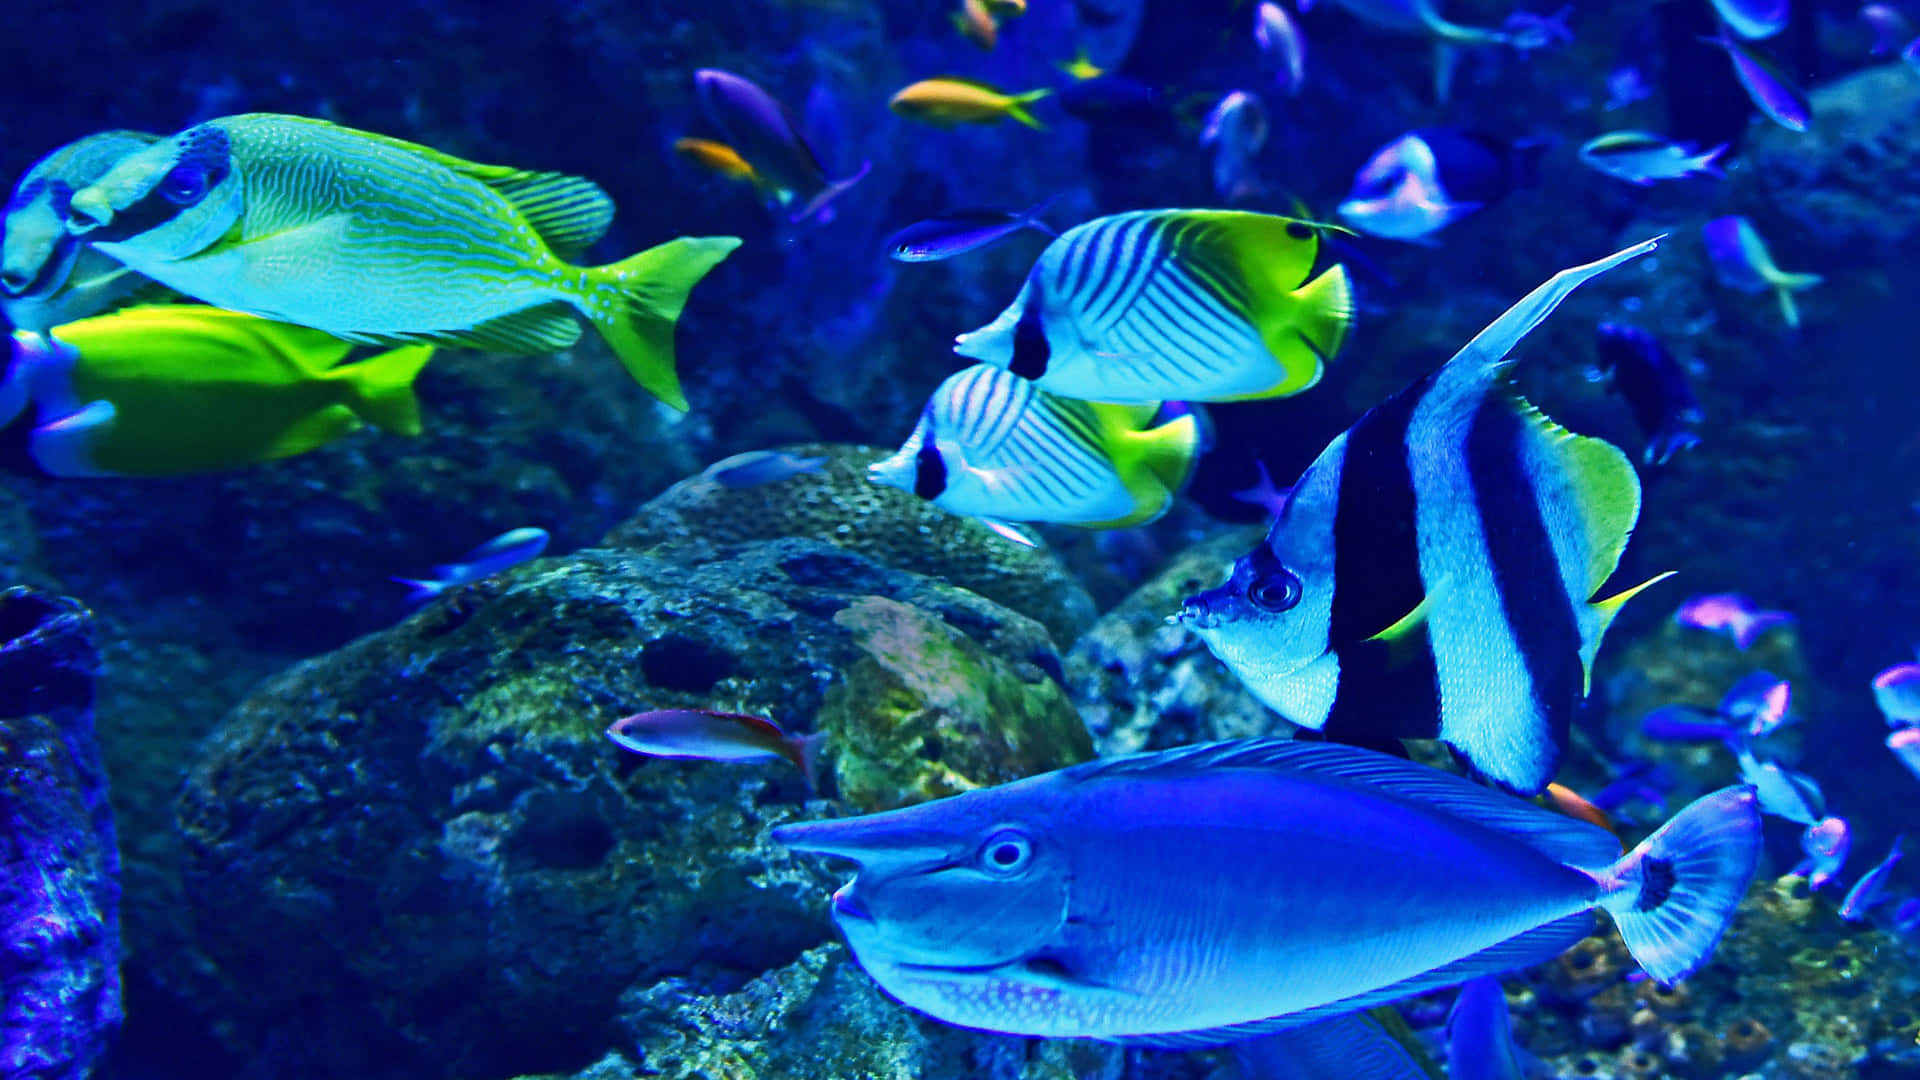 Enjoying the beauty of colourful exotic fish in the aquarium Wallpaper